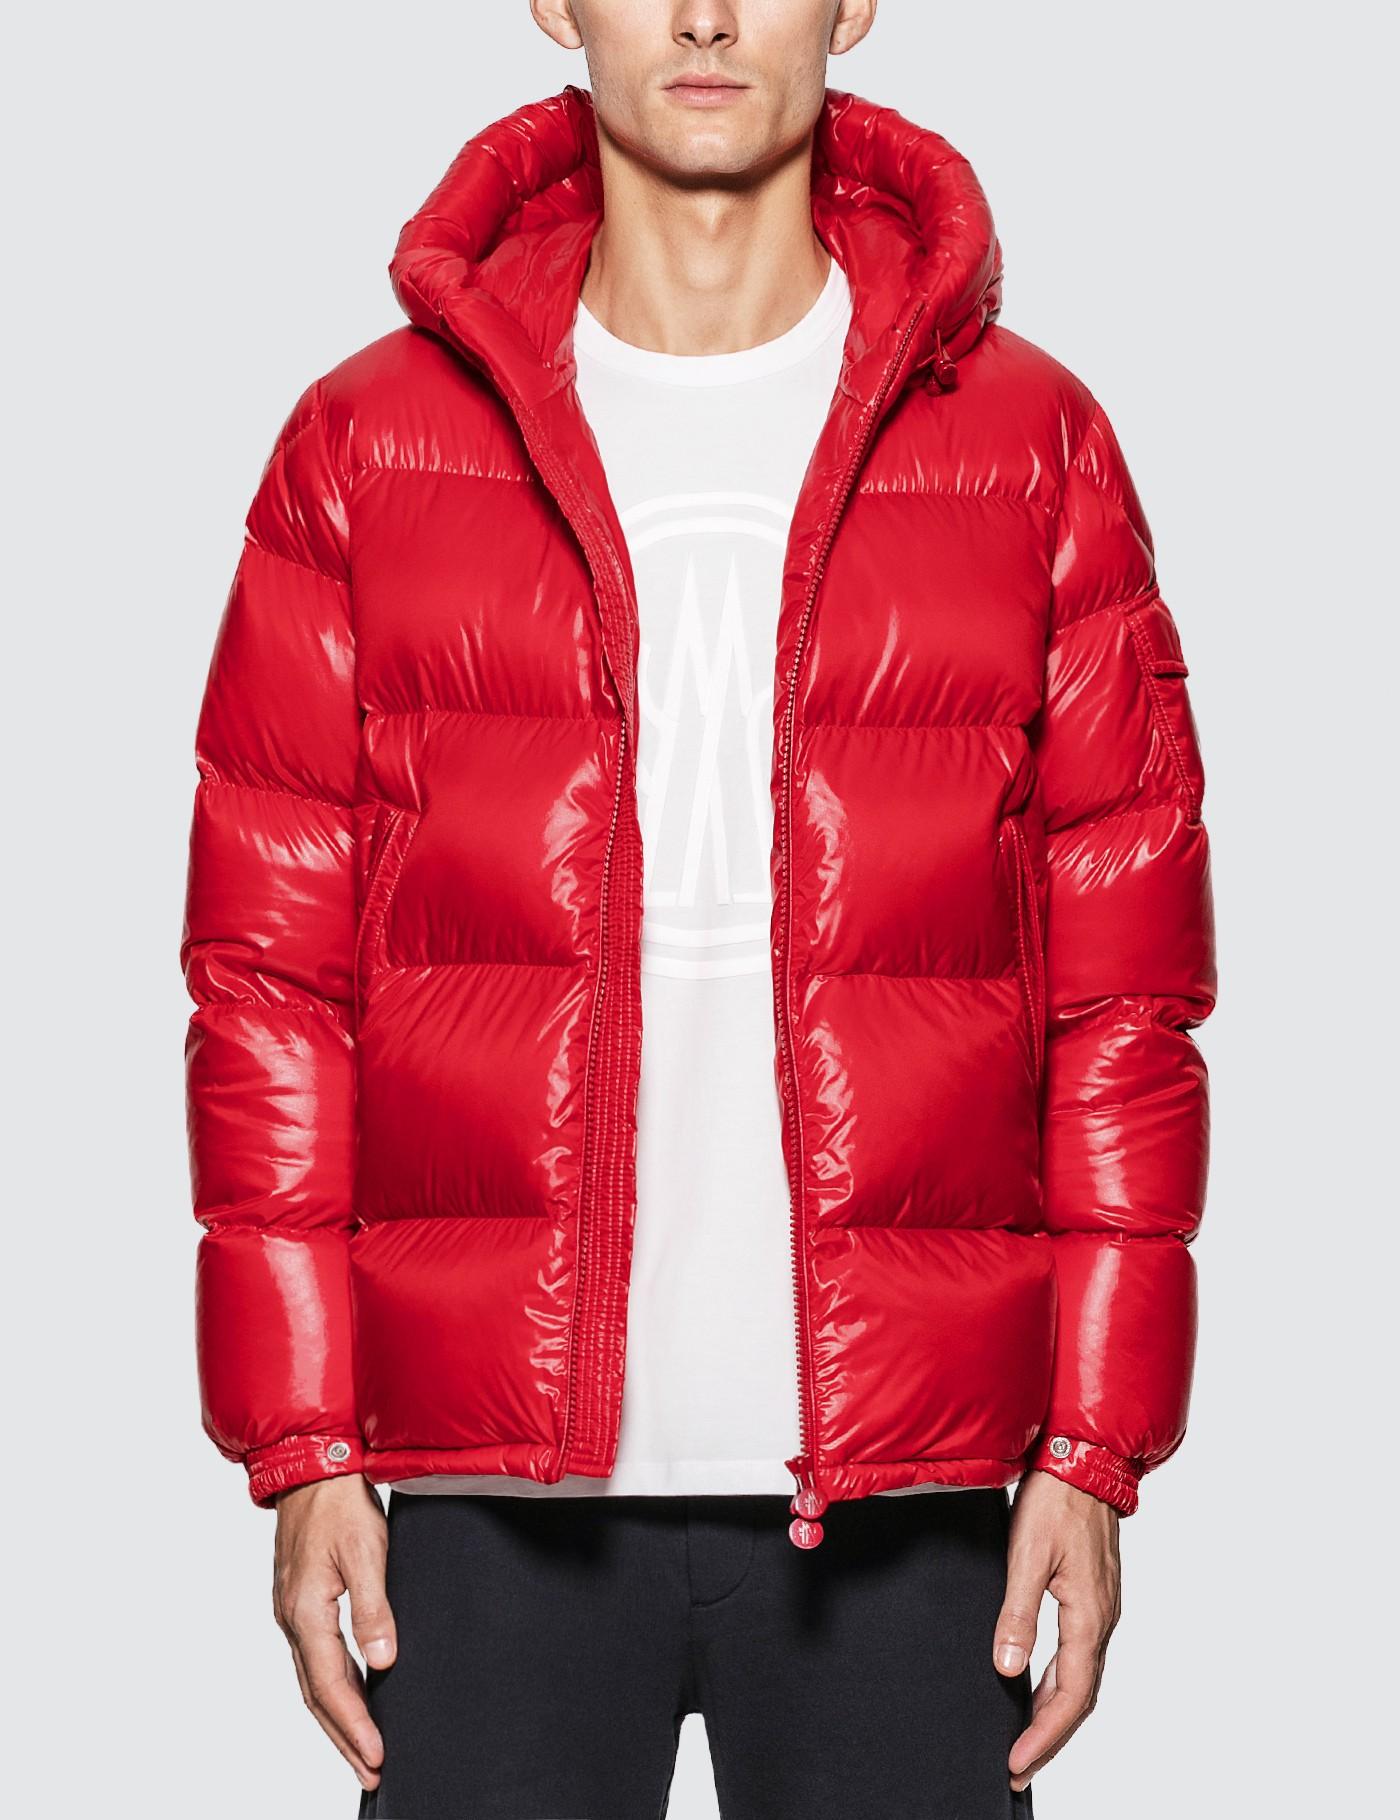 moncler red puffer jacket mens